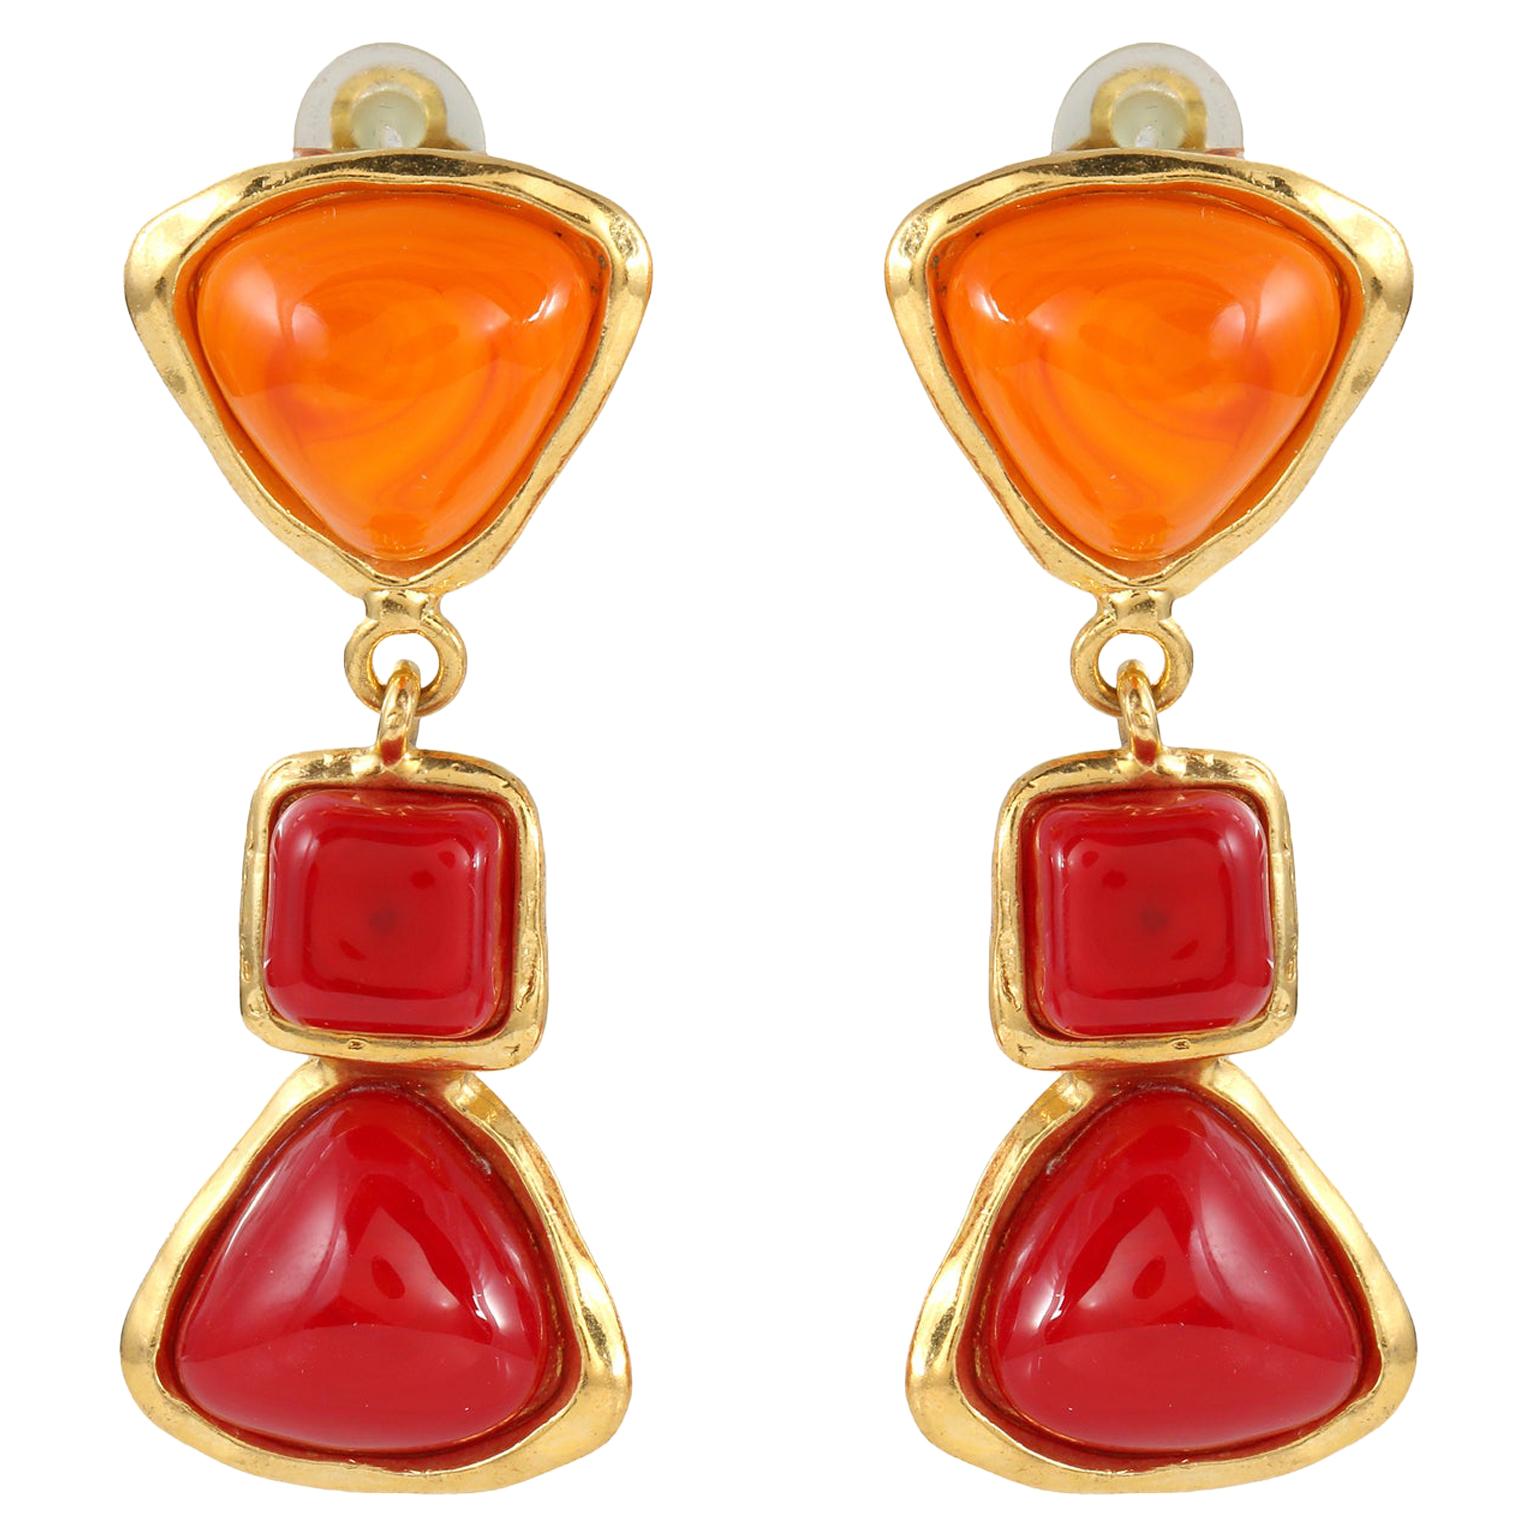 CHANEL- Vintage Stamped 25 Gripoix Square Clip On Earrings - Orange / Red /  Gold